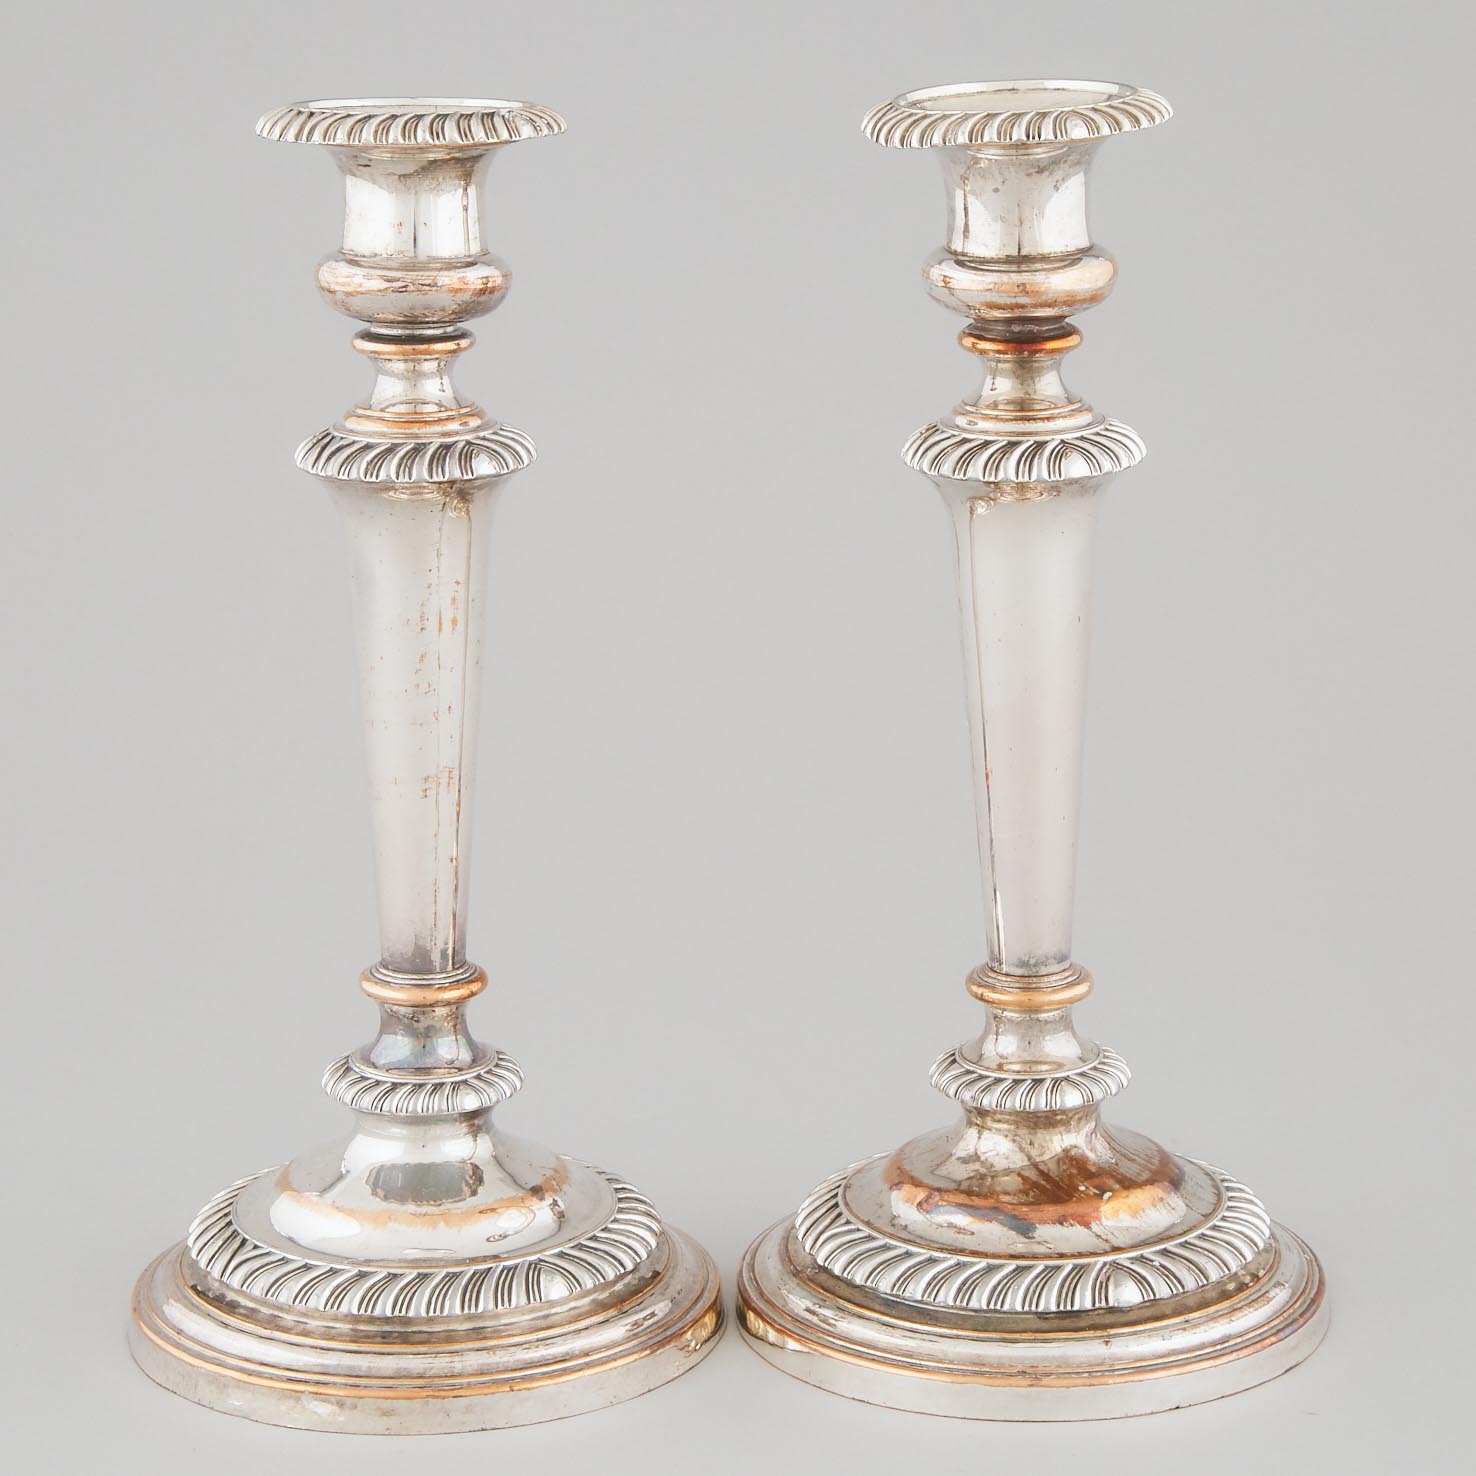 Pair of Old Sheffield Plate Table Candlesticks, c.1820